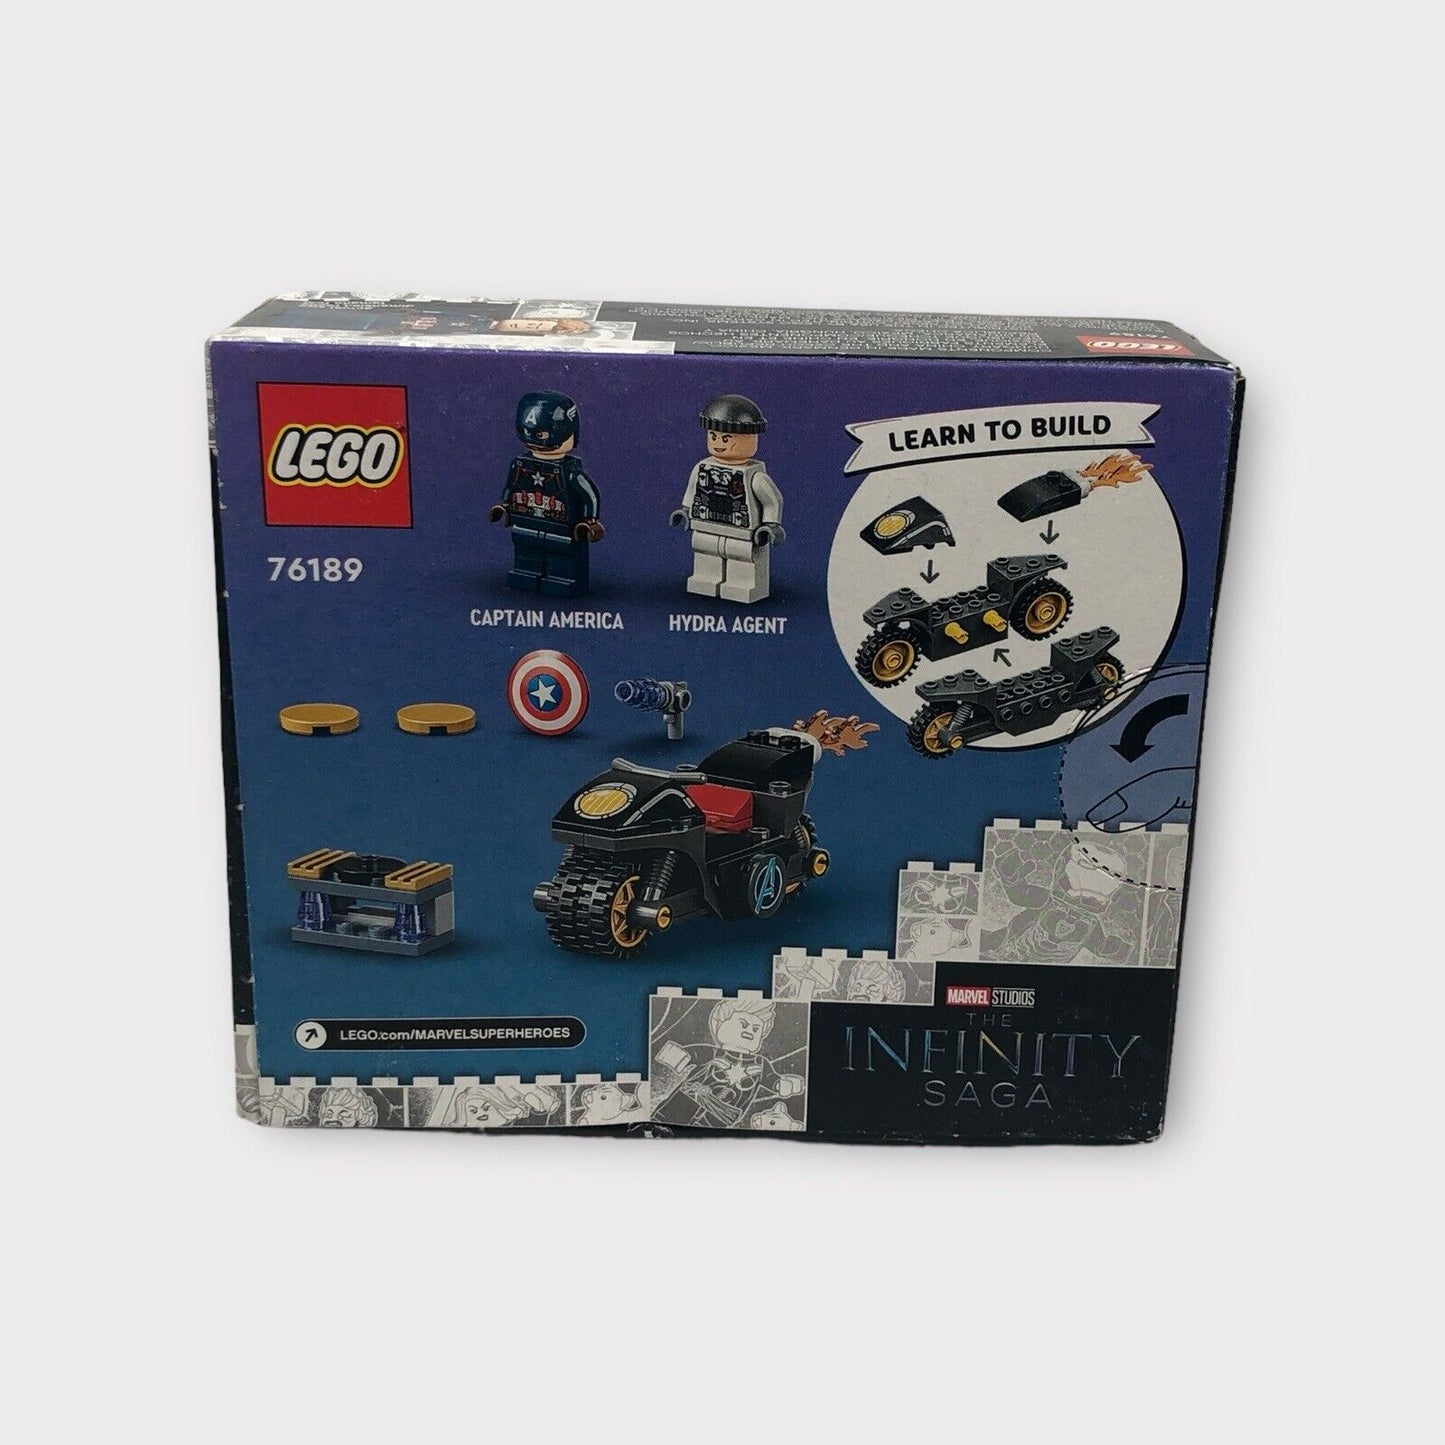 Lego Super Heroes Infinity Saga Captain America and Hydra Face-Off Set 76189